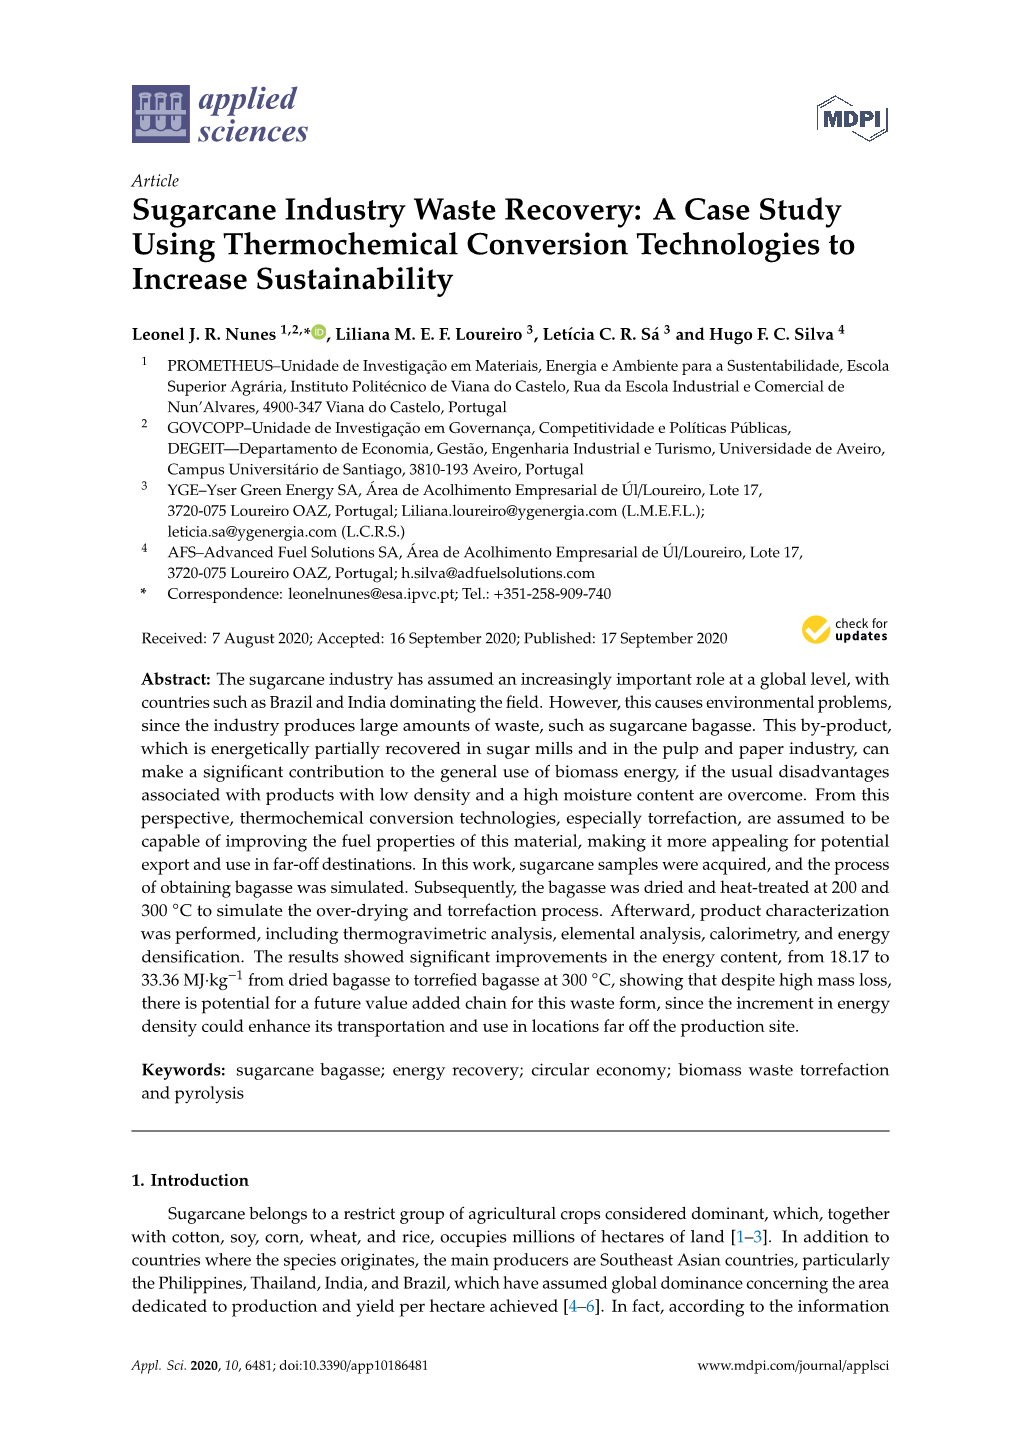 Sugarcane Industry Waste Recovery: a Case Study Using Thermochemical Conversion Technologies to Increase Sustainability